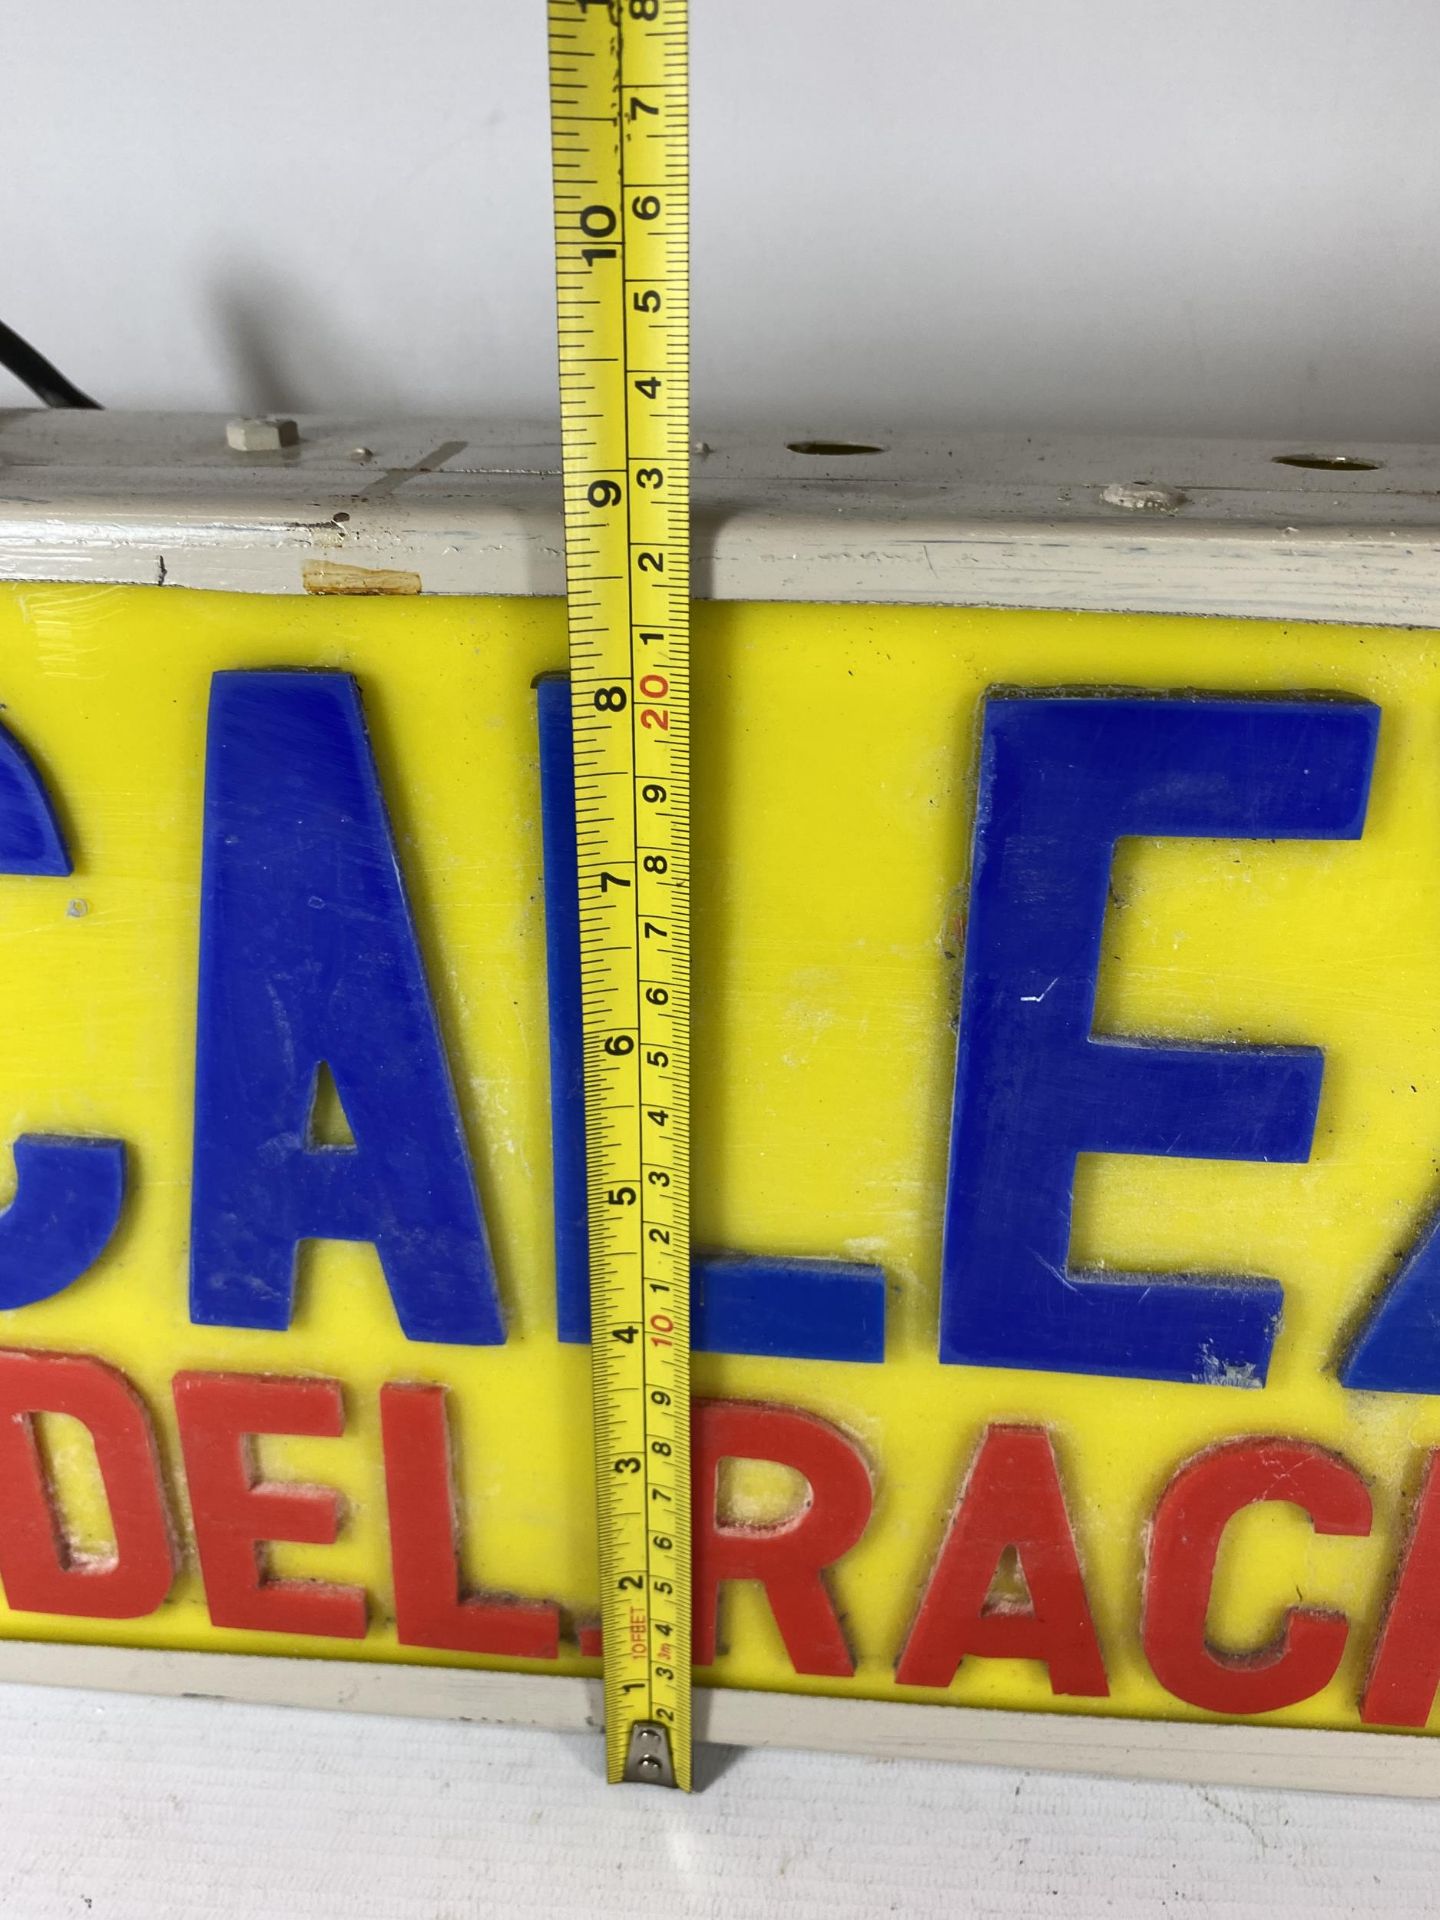 A SCALEXTRIC MODEL RACING CARS ILLUMINATED BOX SIGN, 22.5 X 63.5CM - Image 4 of 5